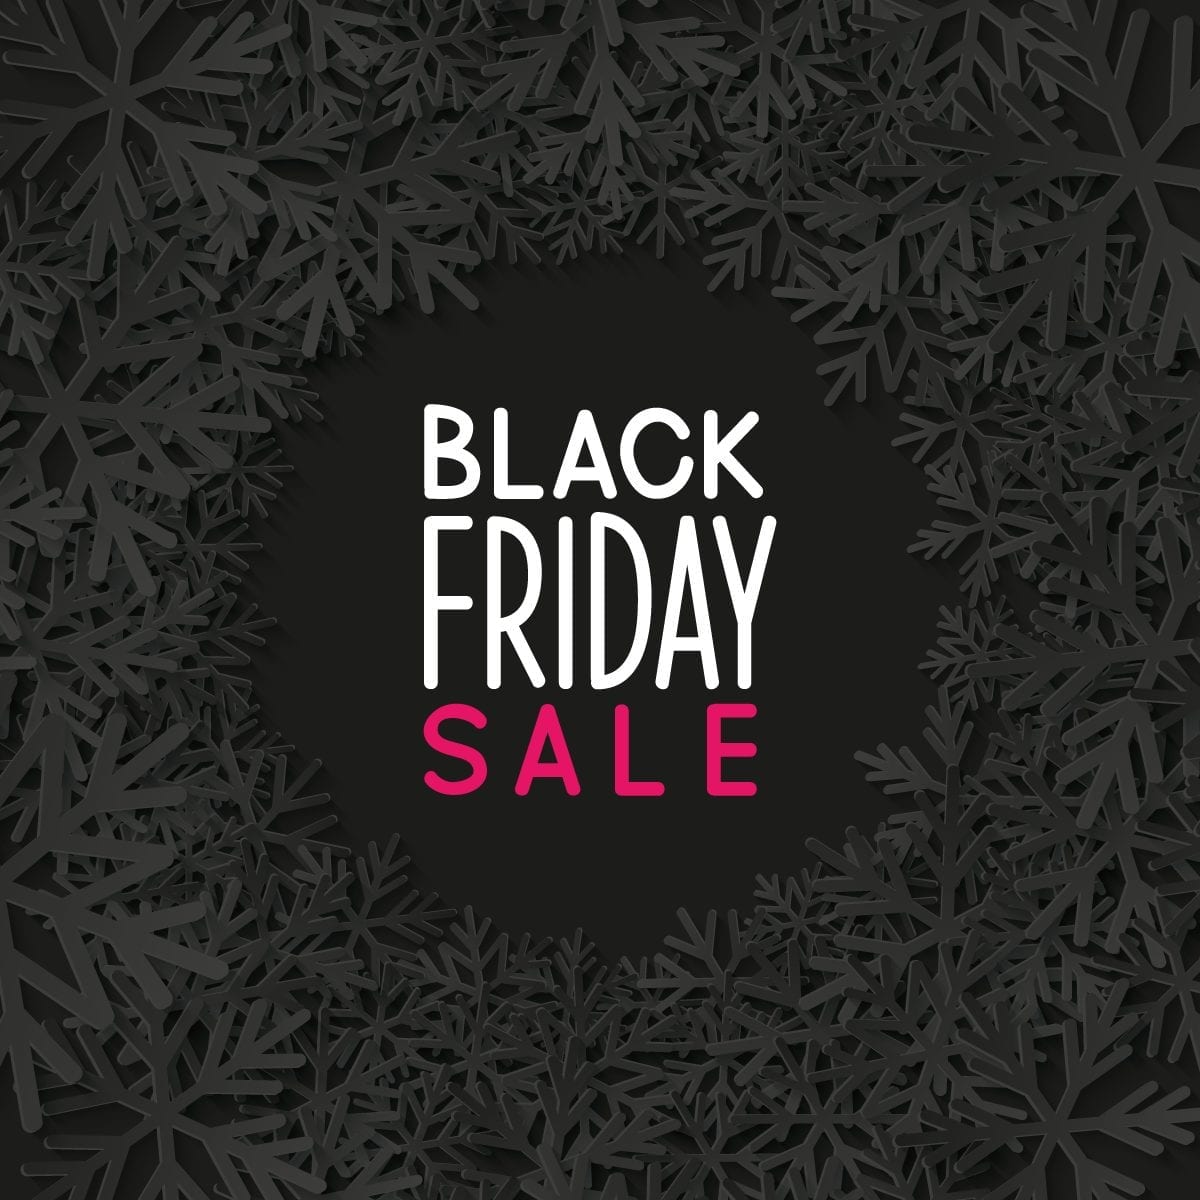 Pink Is The New Black Black Friday Deals From O Brien Media